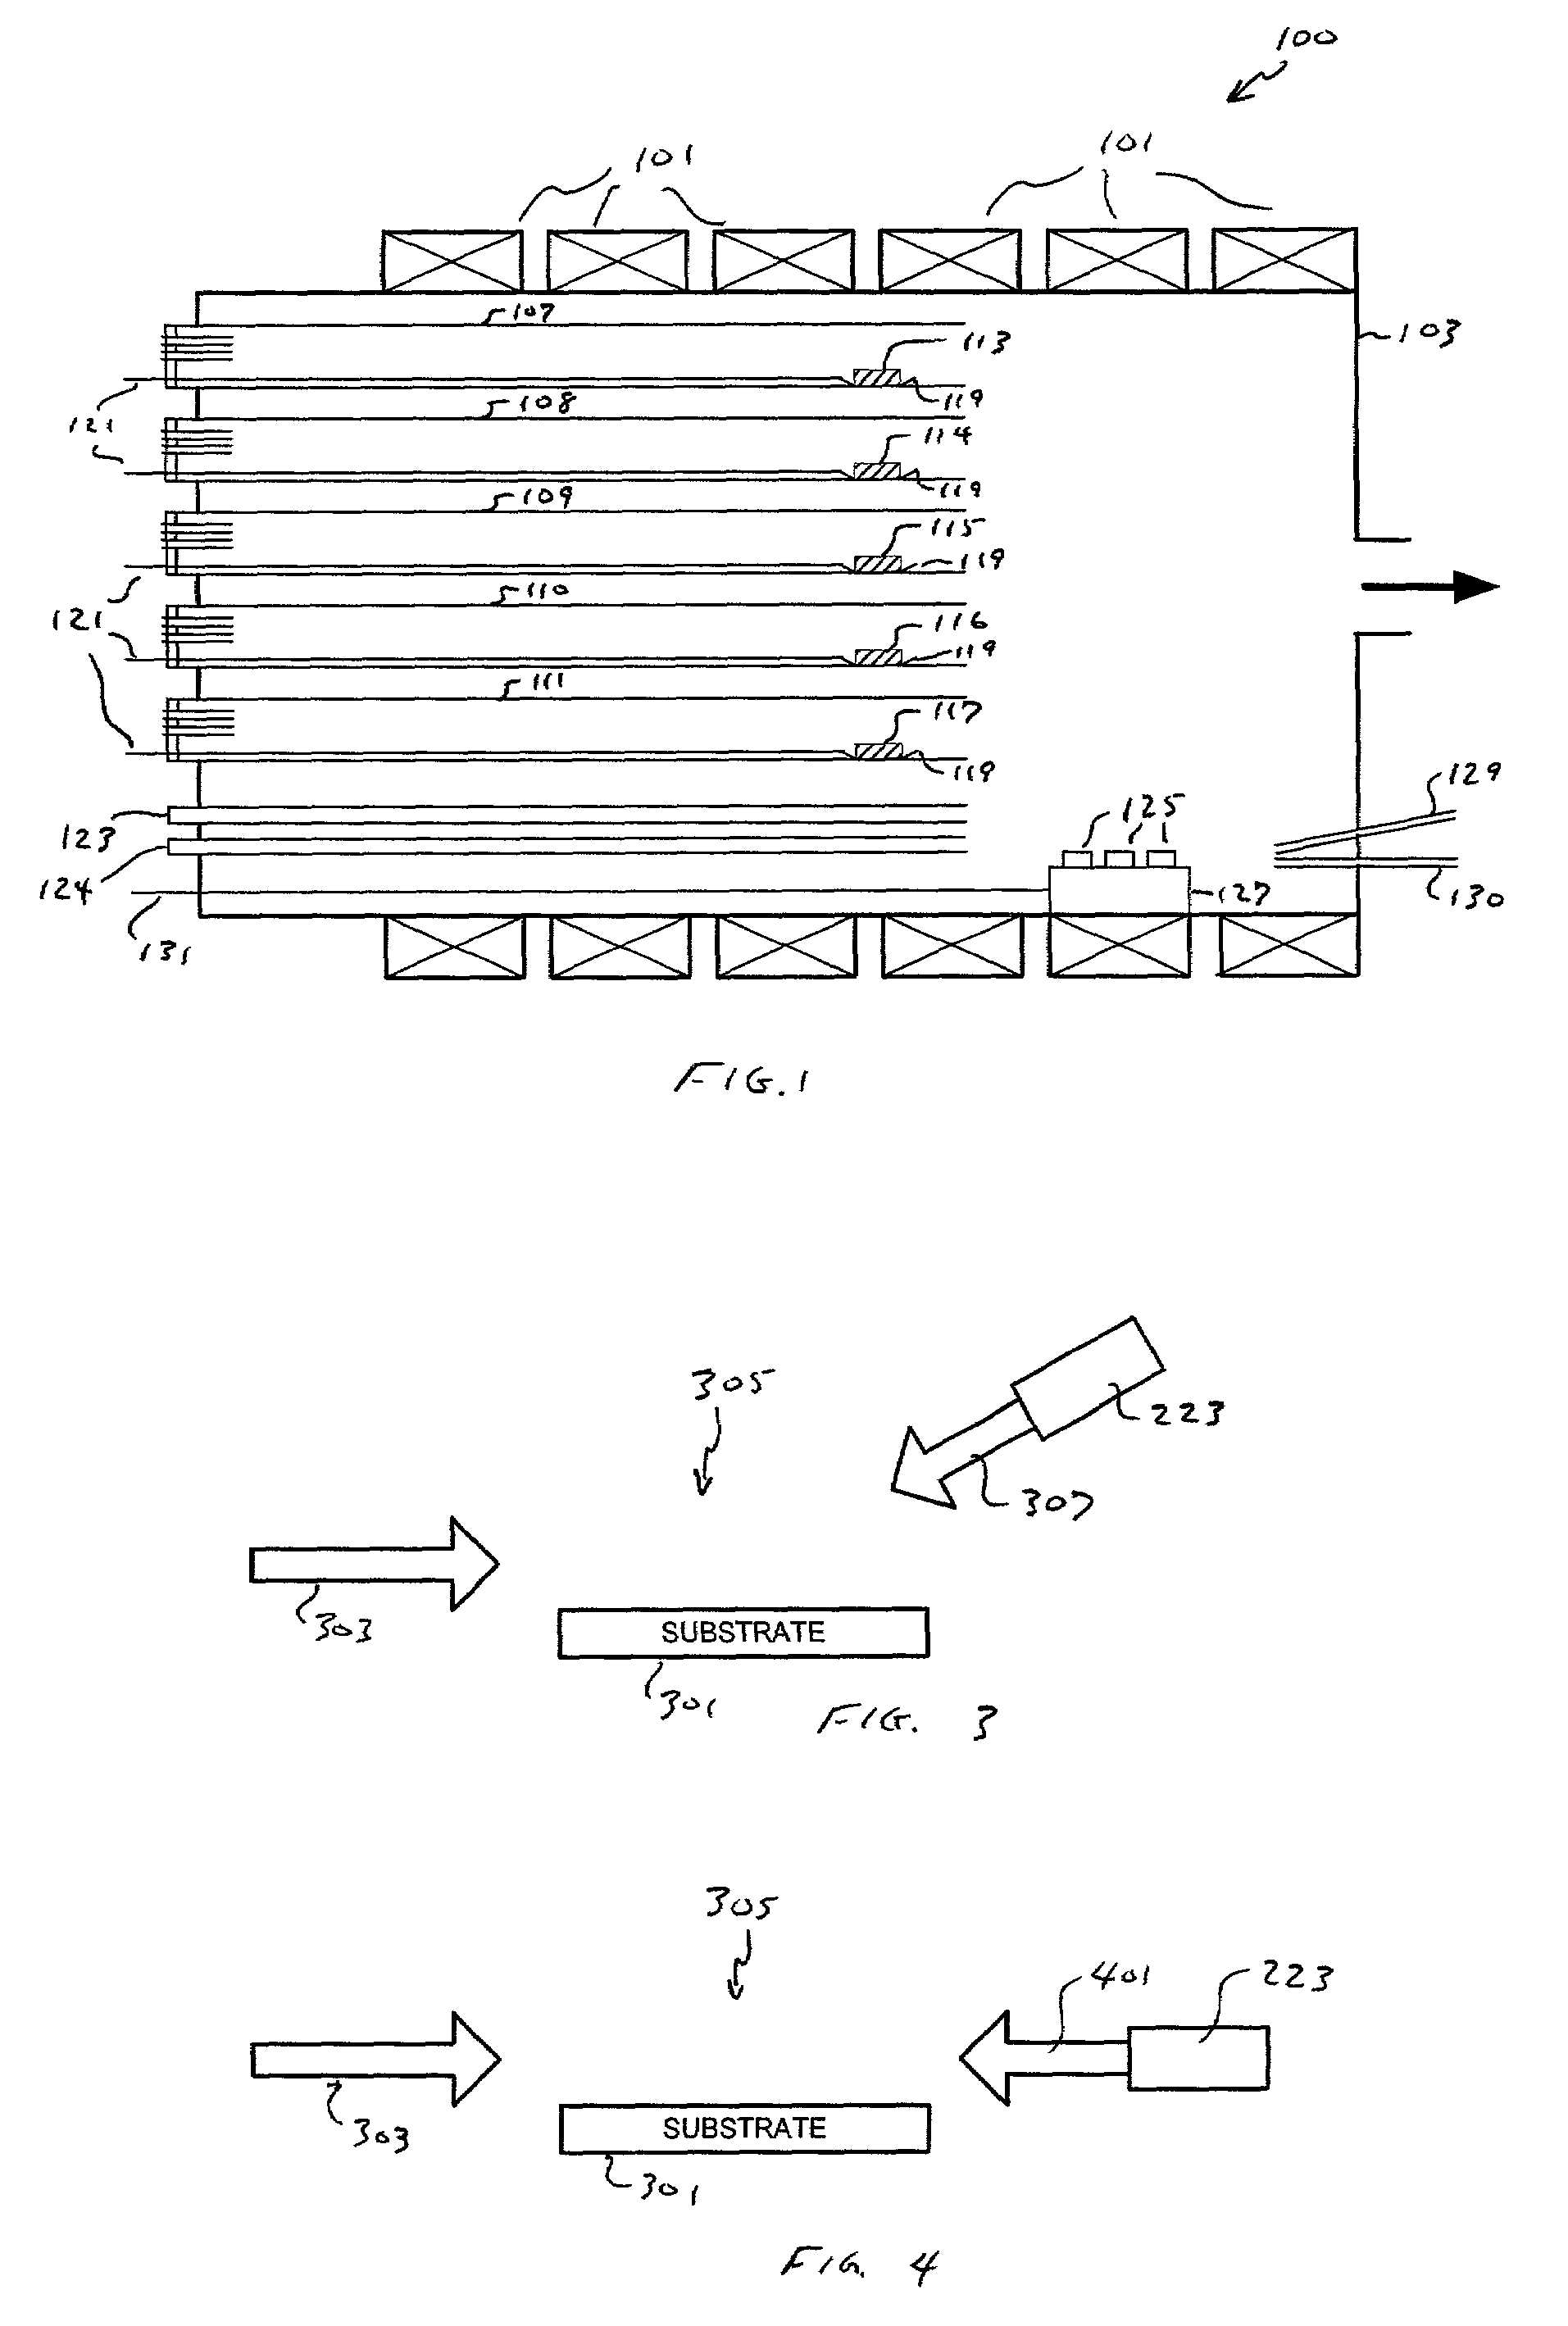 Apparatus for epitaxially growing semiconductor device structures with sharp layer interfaces utilizing HVPE